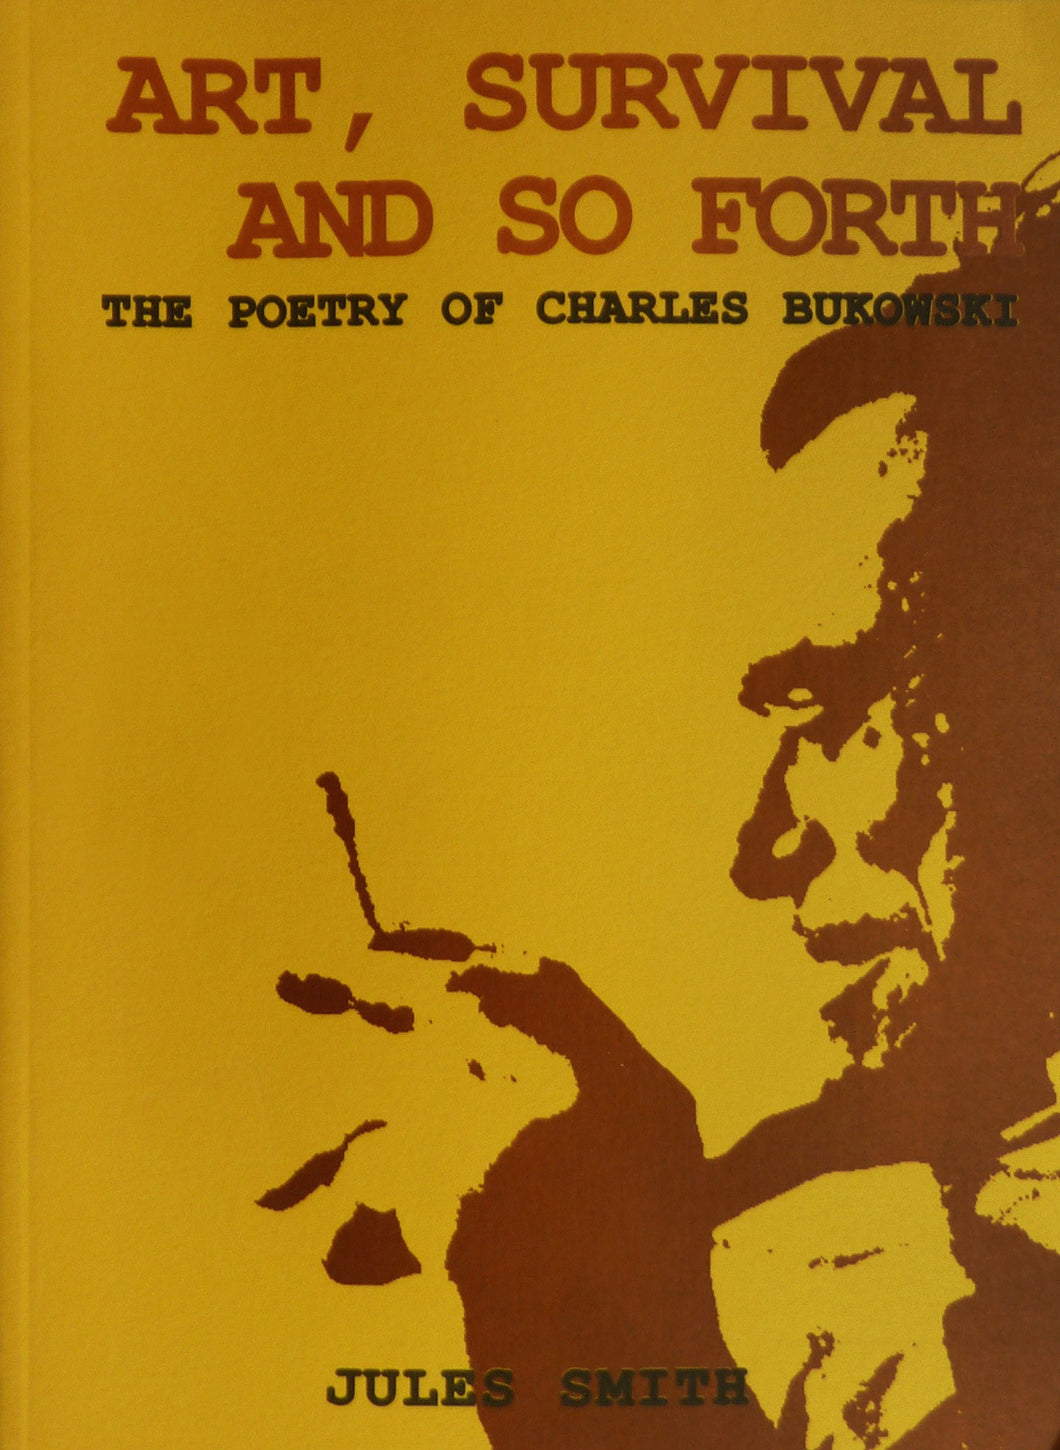 Art, Survival & So Forth: The Poetry of Charles Bukowski